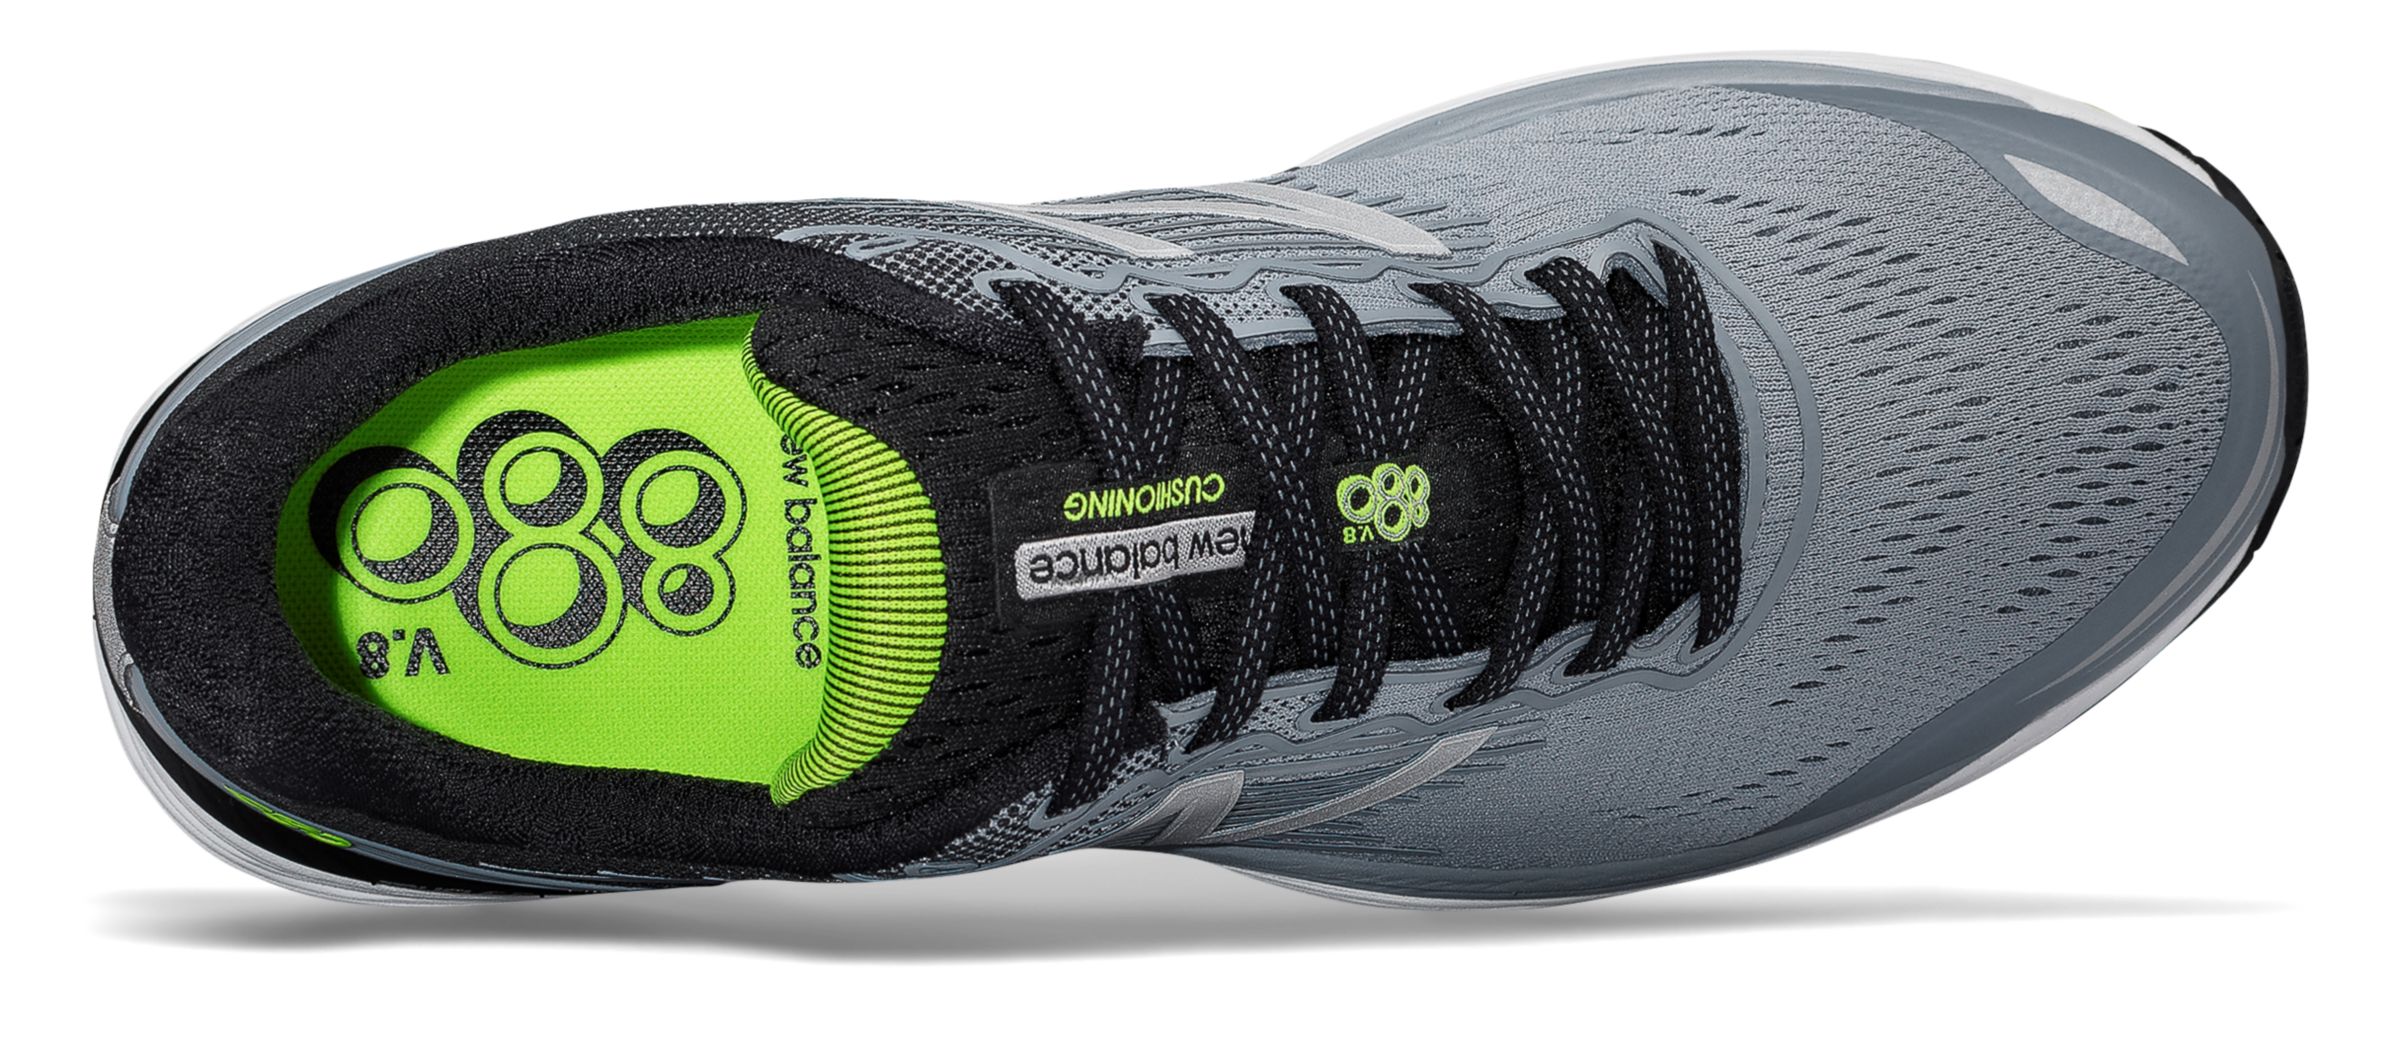 new balance m880gy8 review